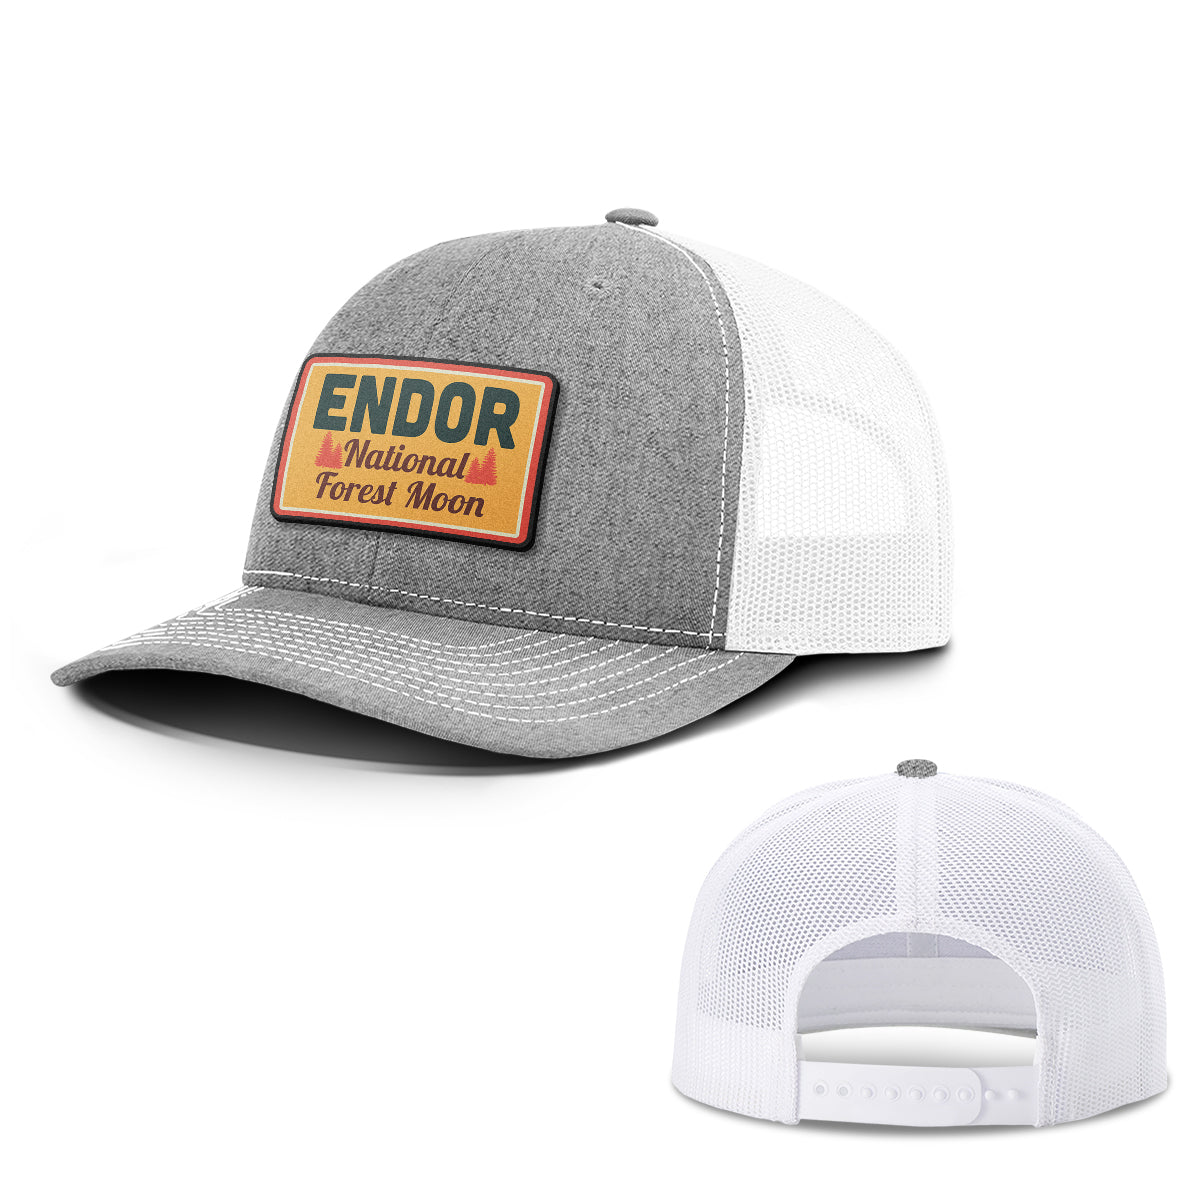 Endor National Forest Moon Patch Hats